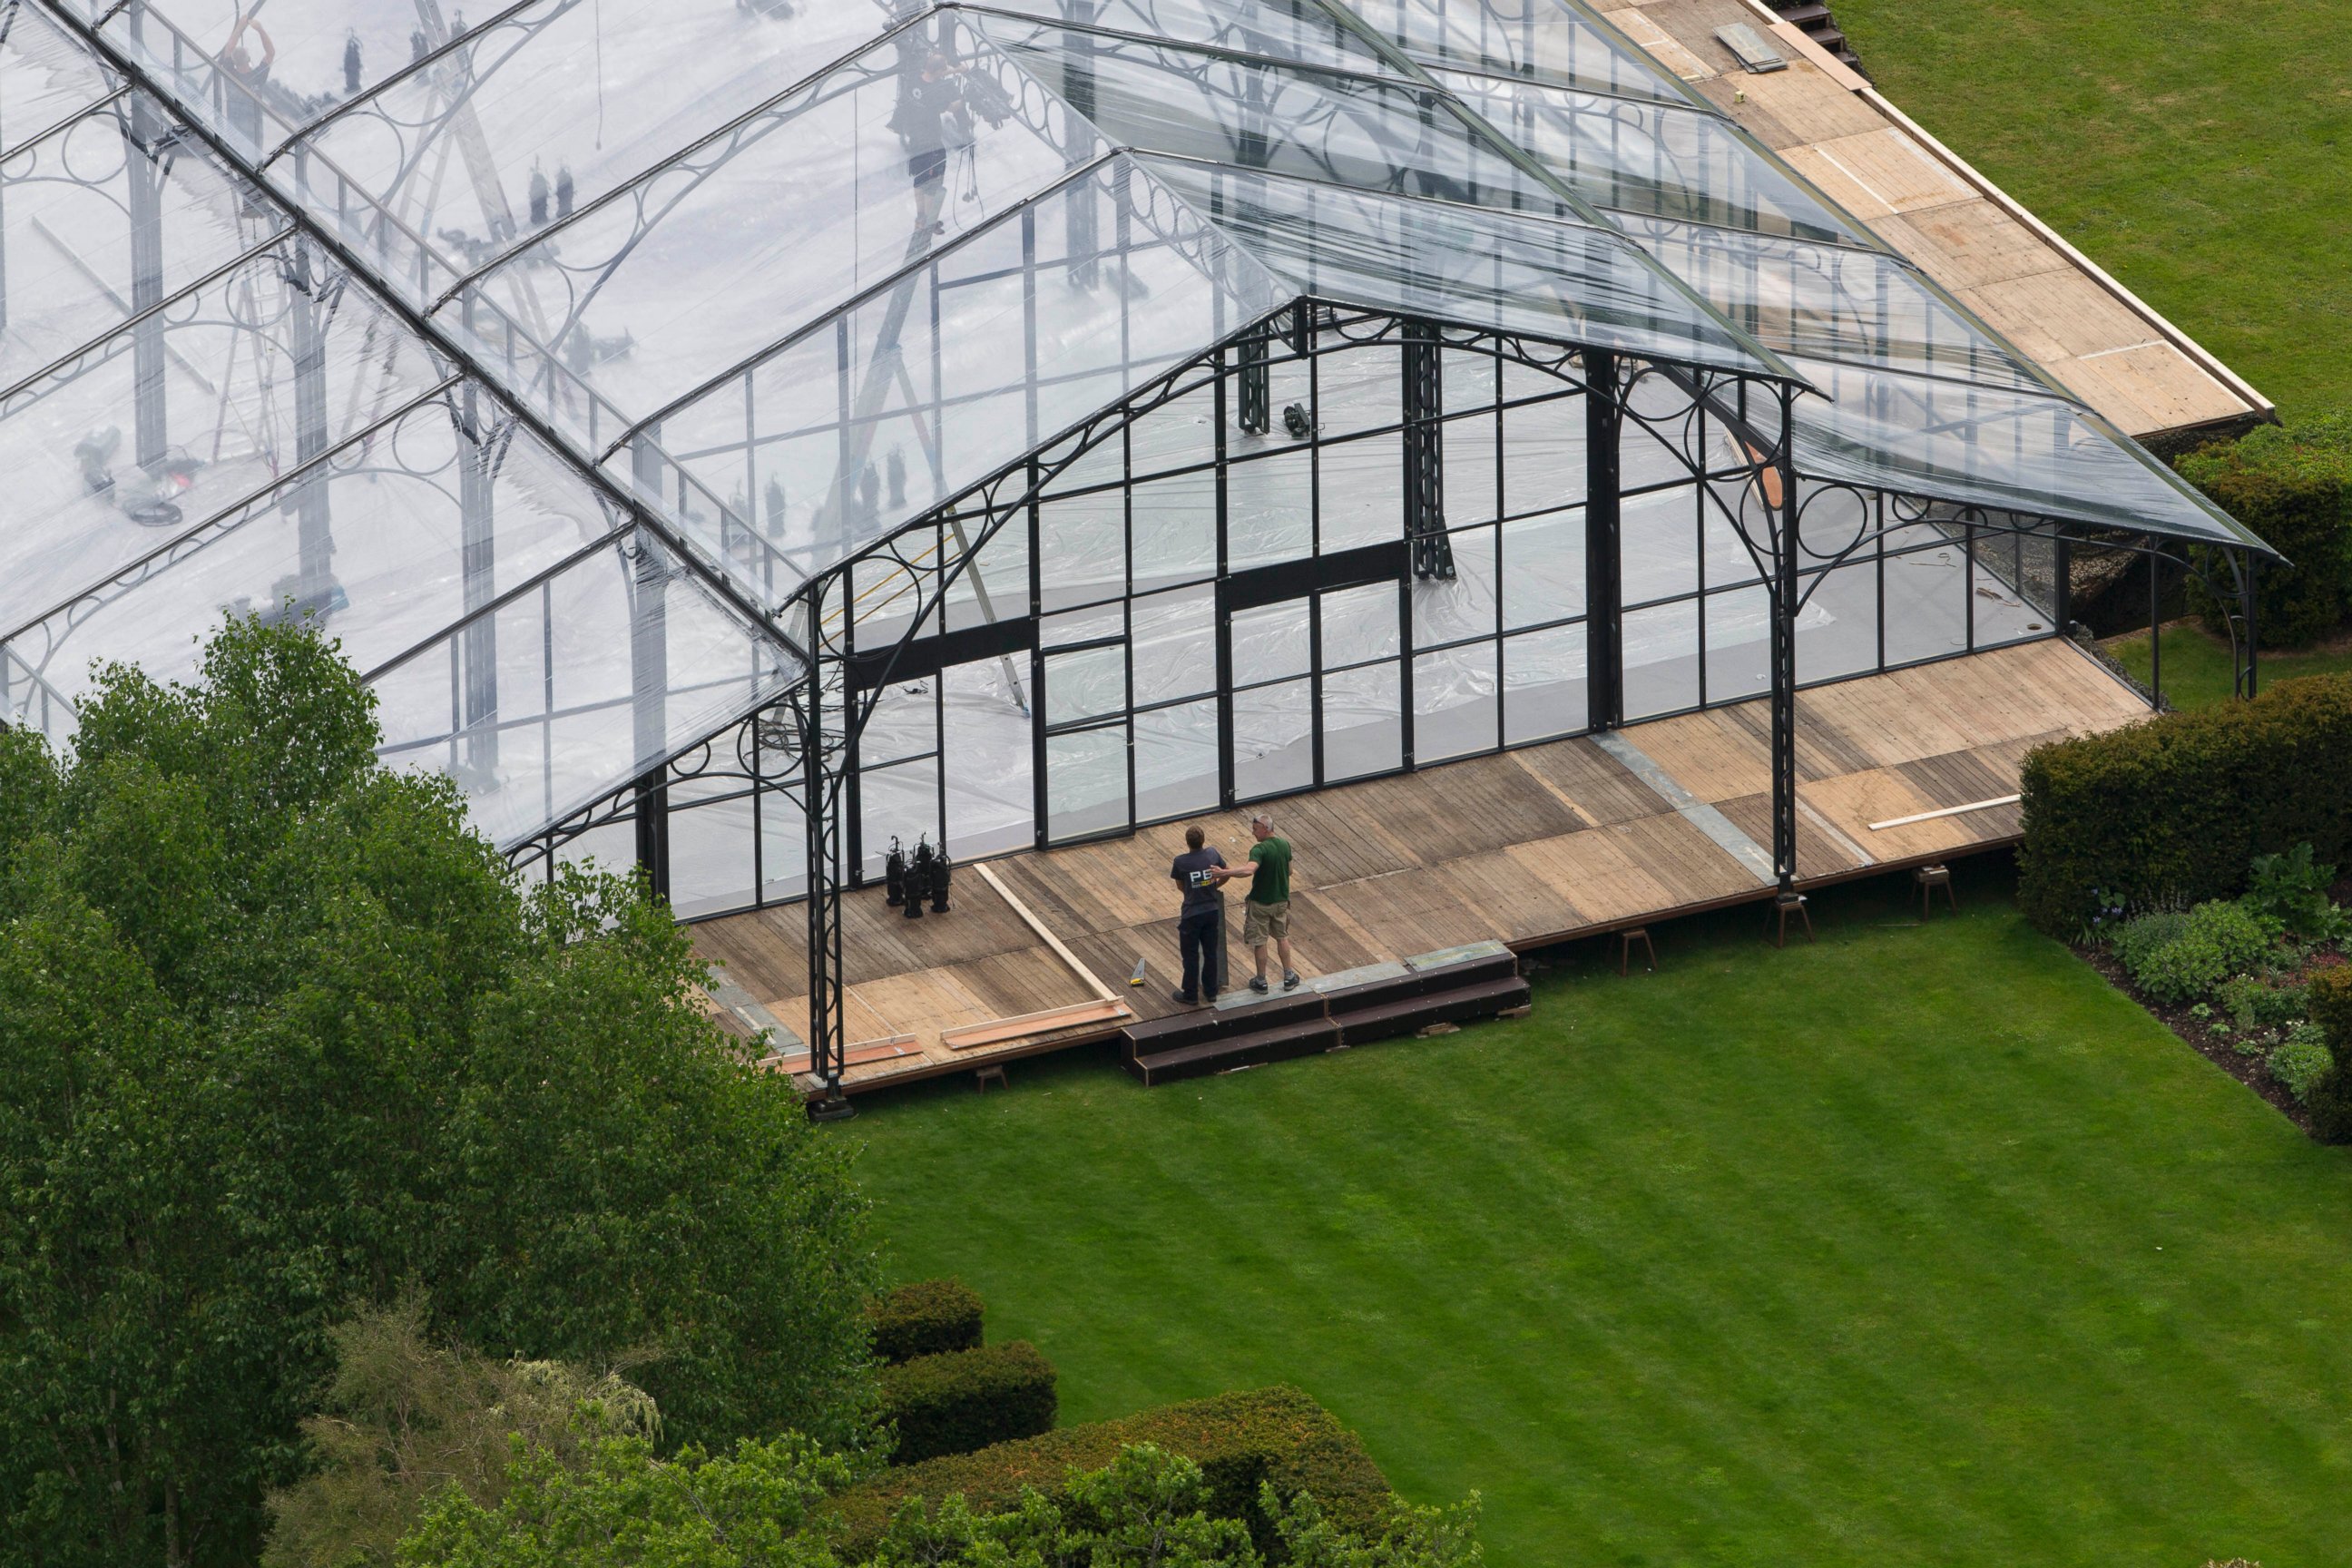 PHOTO: Aerials views of the Middleton family home in Bucklebury, UK where a gigantic conservatory-style marquee dominates the surrounding gardens. Preparations continue for the upcoming wedding of Pippa Middleton to James Matthews.